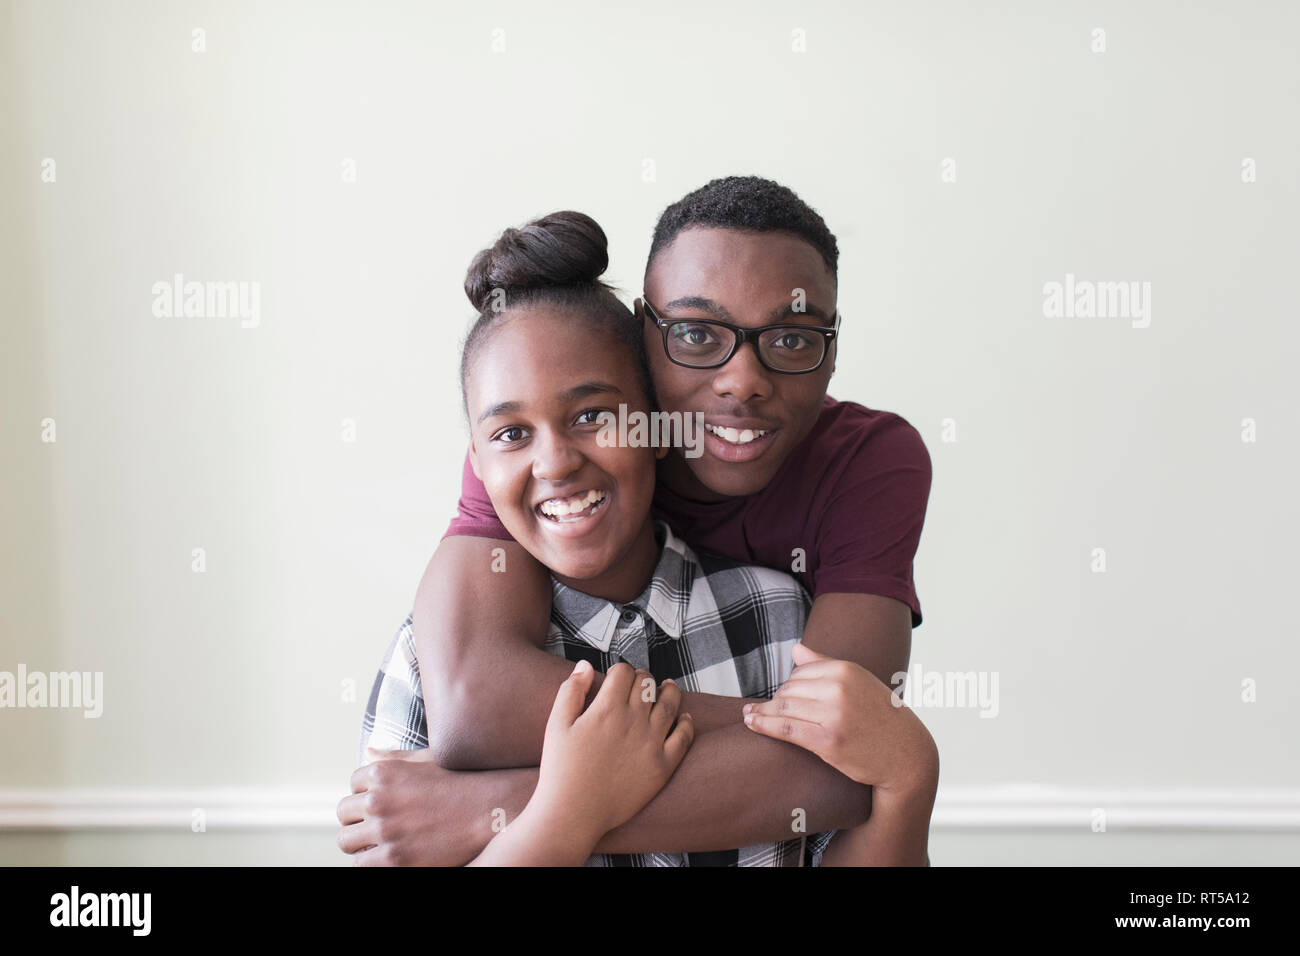 Portrait affectionate teenage brother and sister Stock Photo